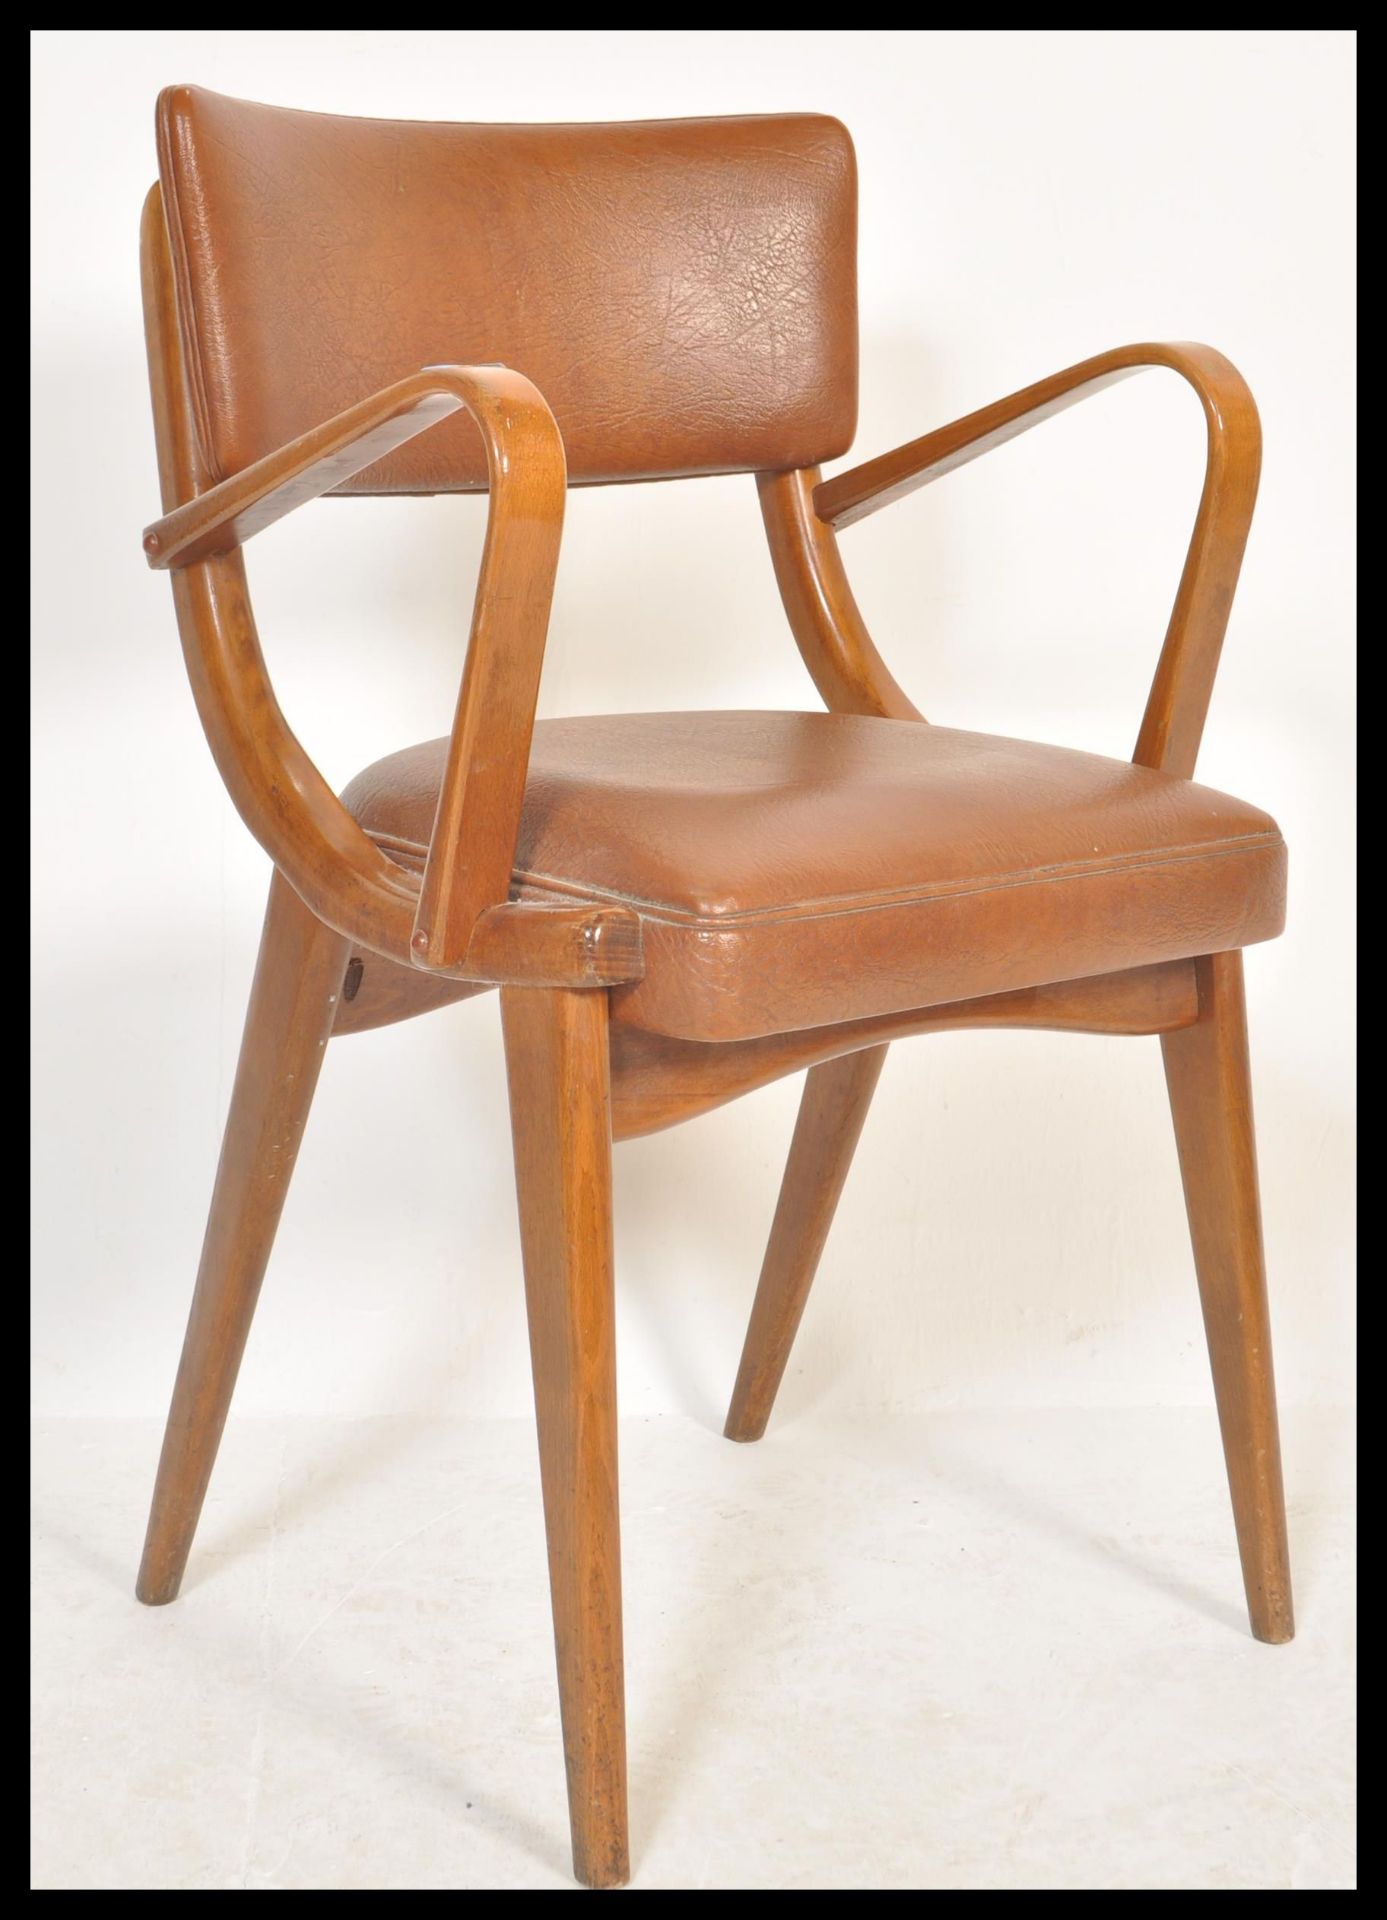 A vintage retro 20th Century Ben Chairs armchair raised on shaped angular legs with leather / faux